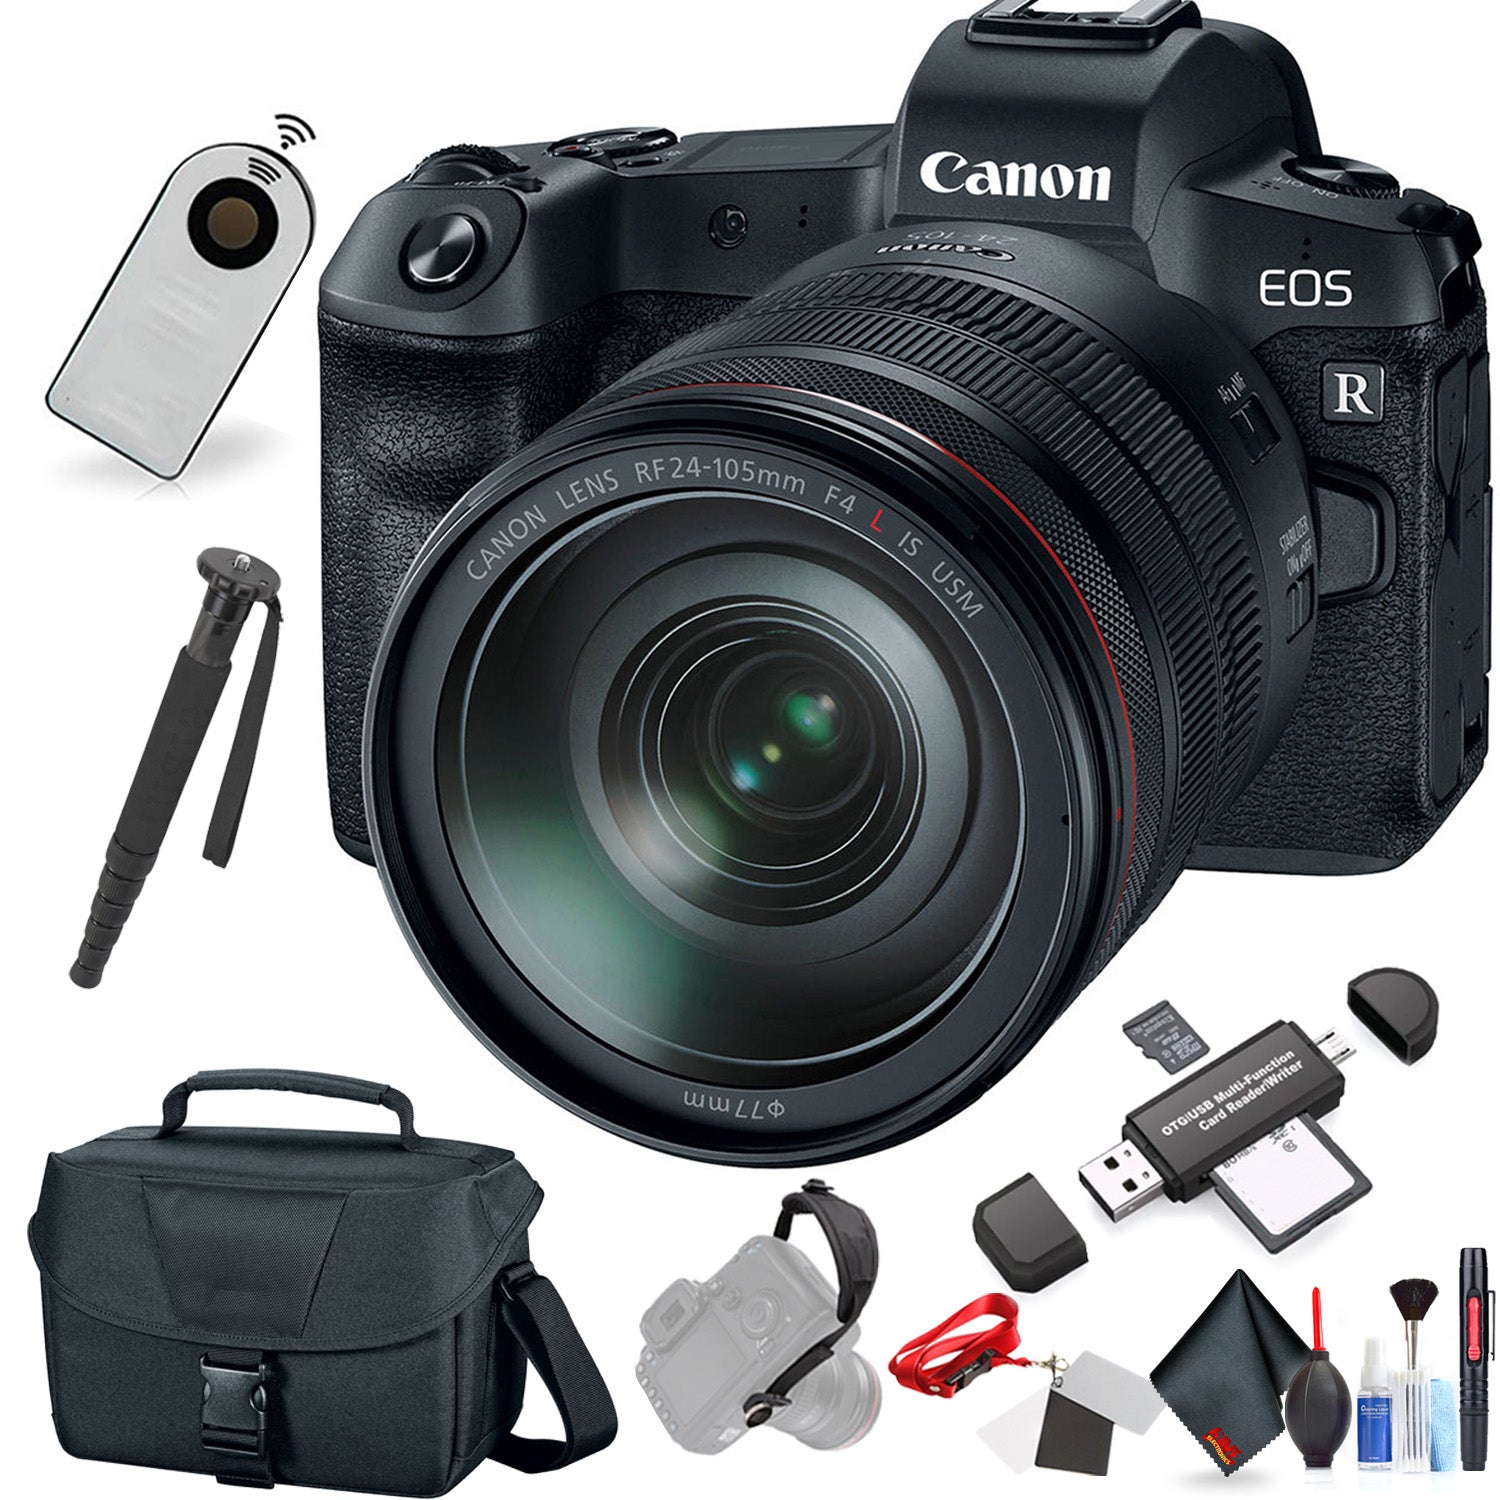 Canon EOS R Mirrorless Digital Camera with 24-105mm Lens (International Model) with Extra Accessory Bundle